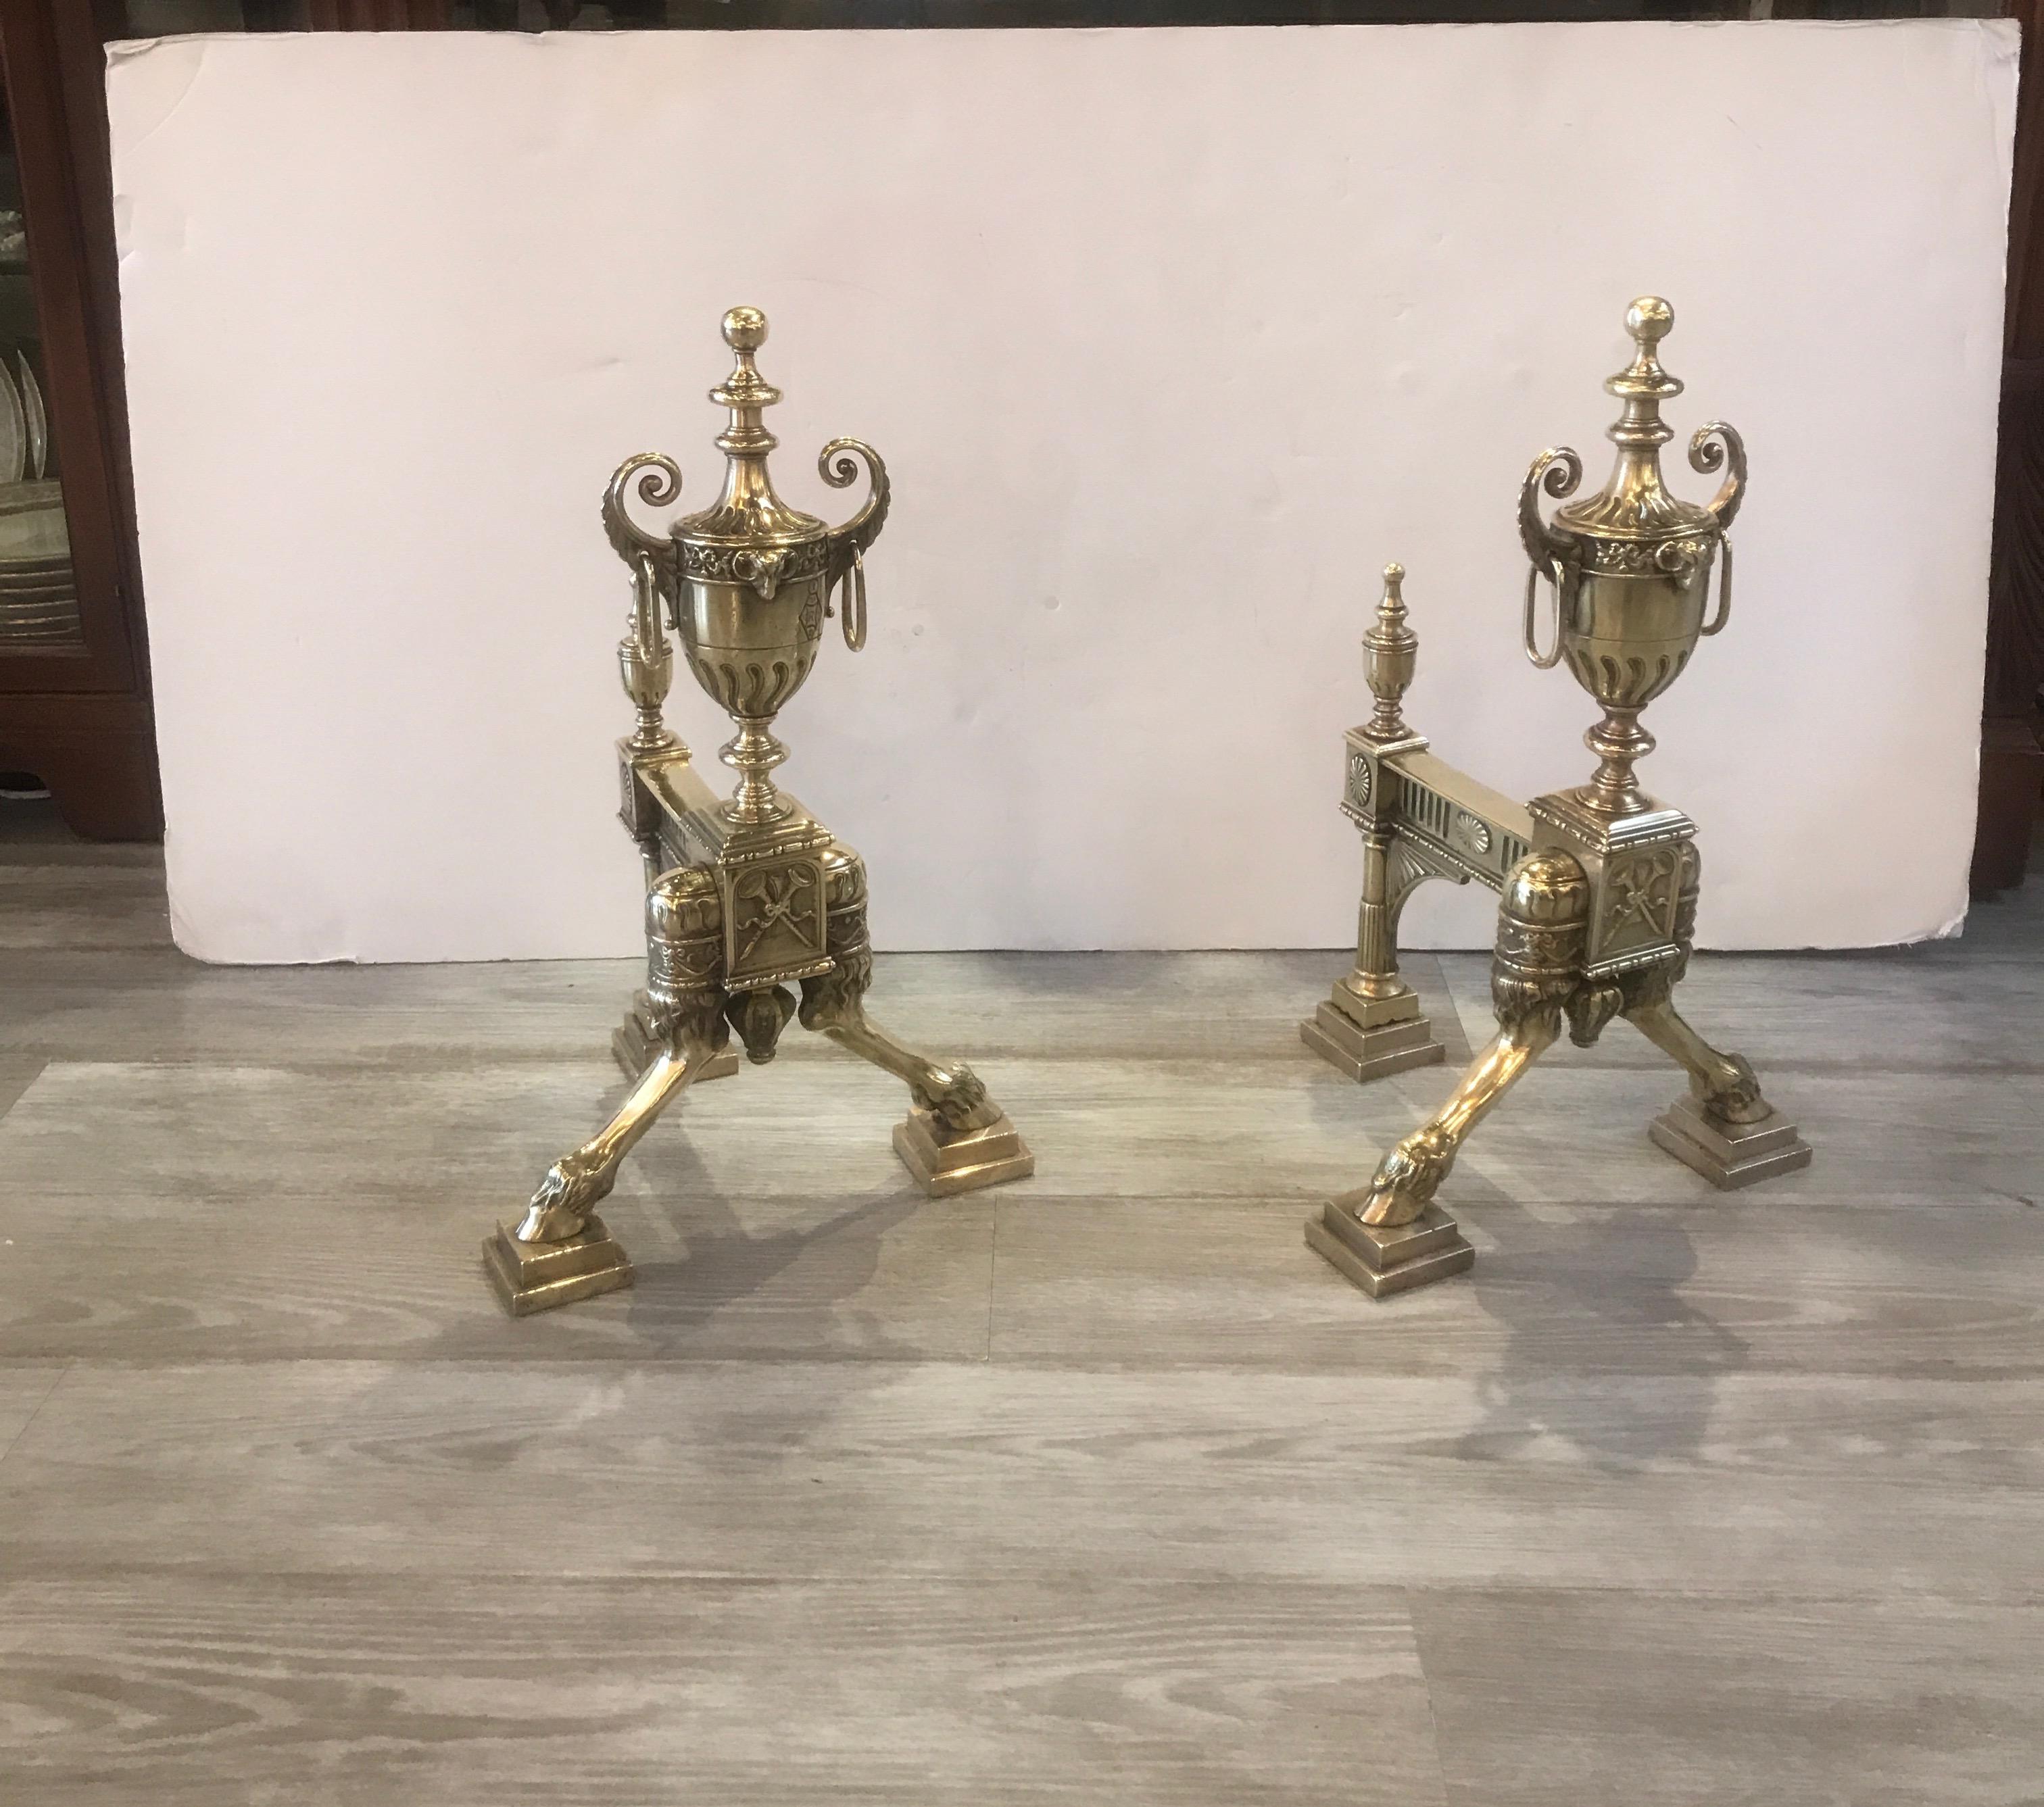 Elegant pair of polished cast bronze chenet andirons. The solid bronze with urn tops with front paw feet and beautifully detailed back legs. Clearly marked with English registry mark showing the date of September 21, 1882.